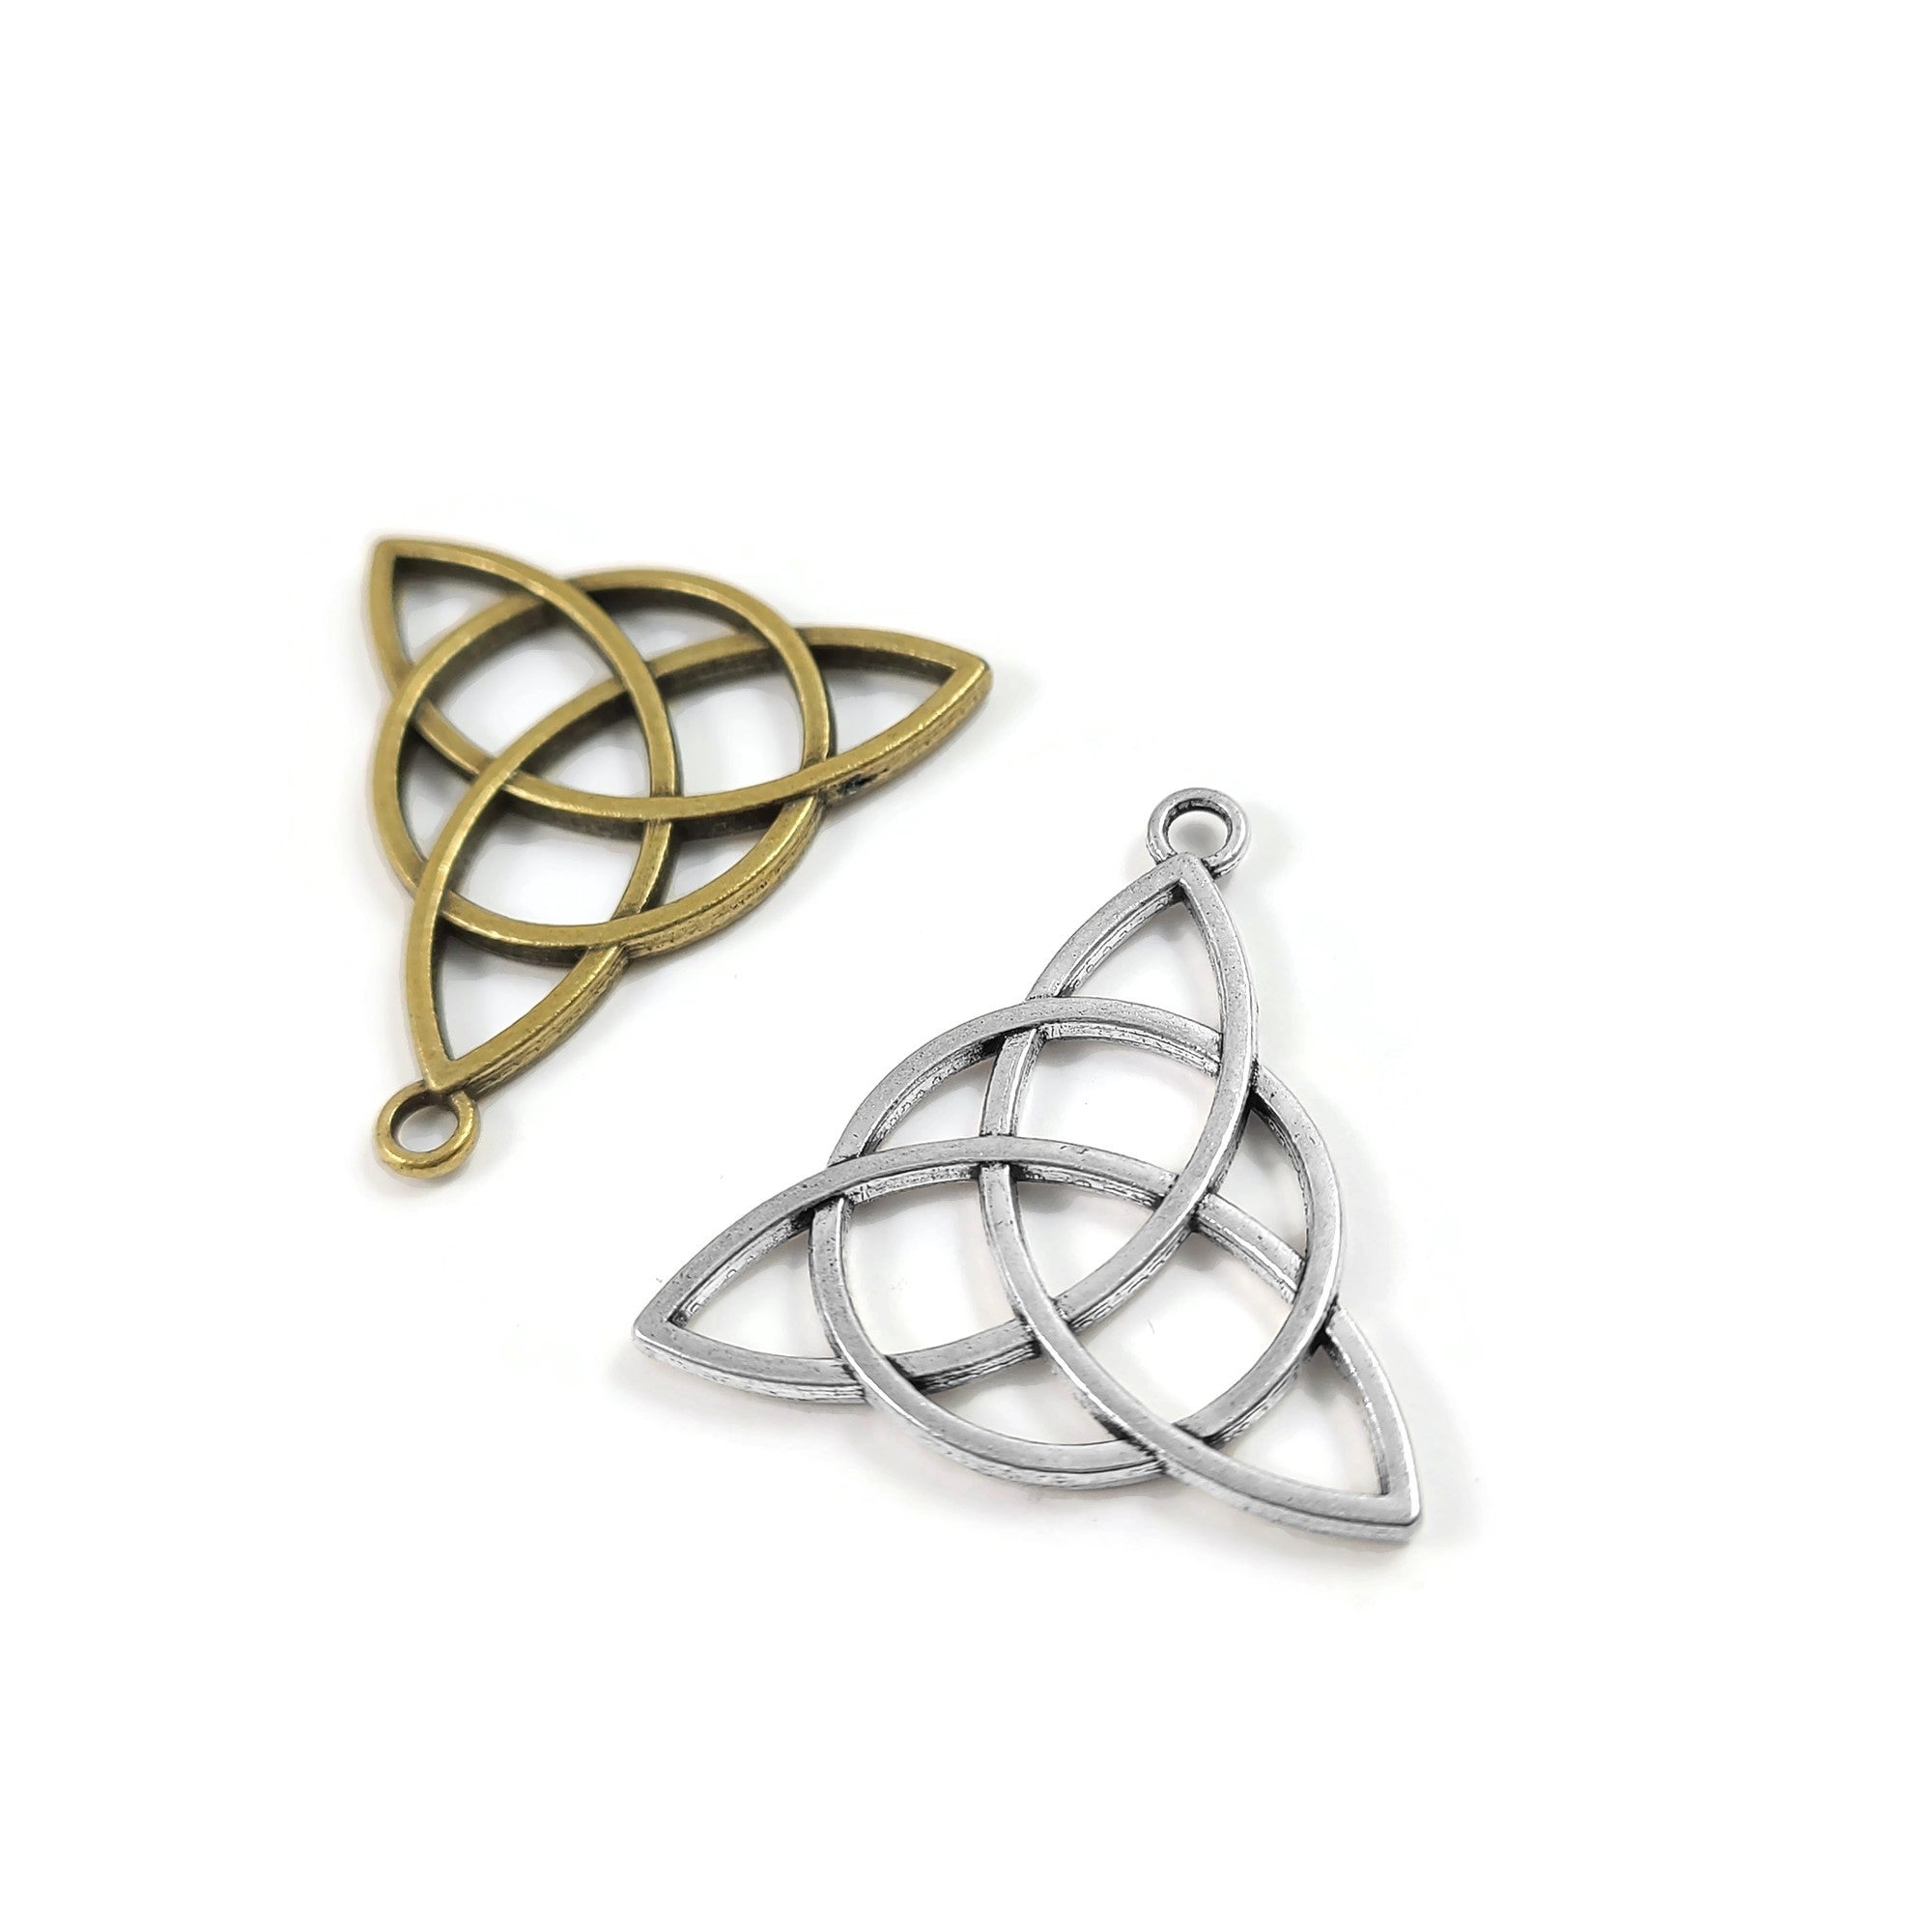 2 celtic triangle knot charms, 30mm metal pendants, Nickel free, lead free and cadmium free